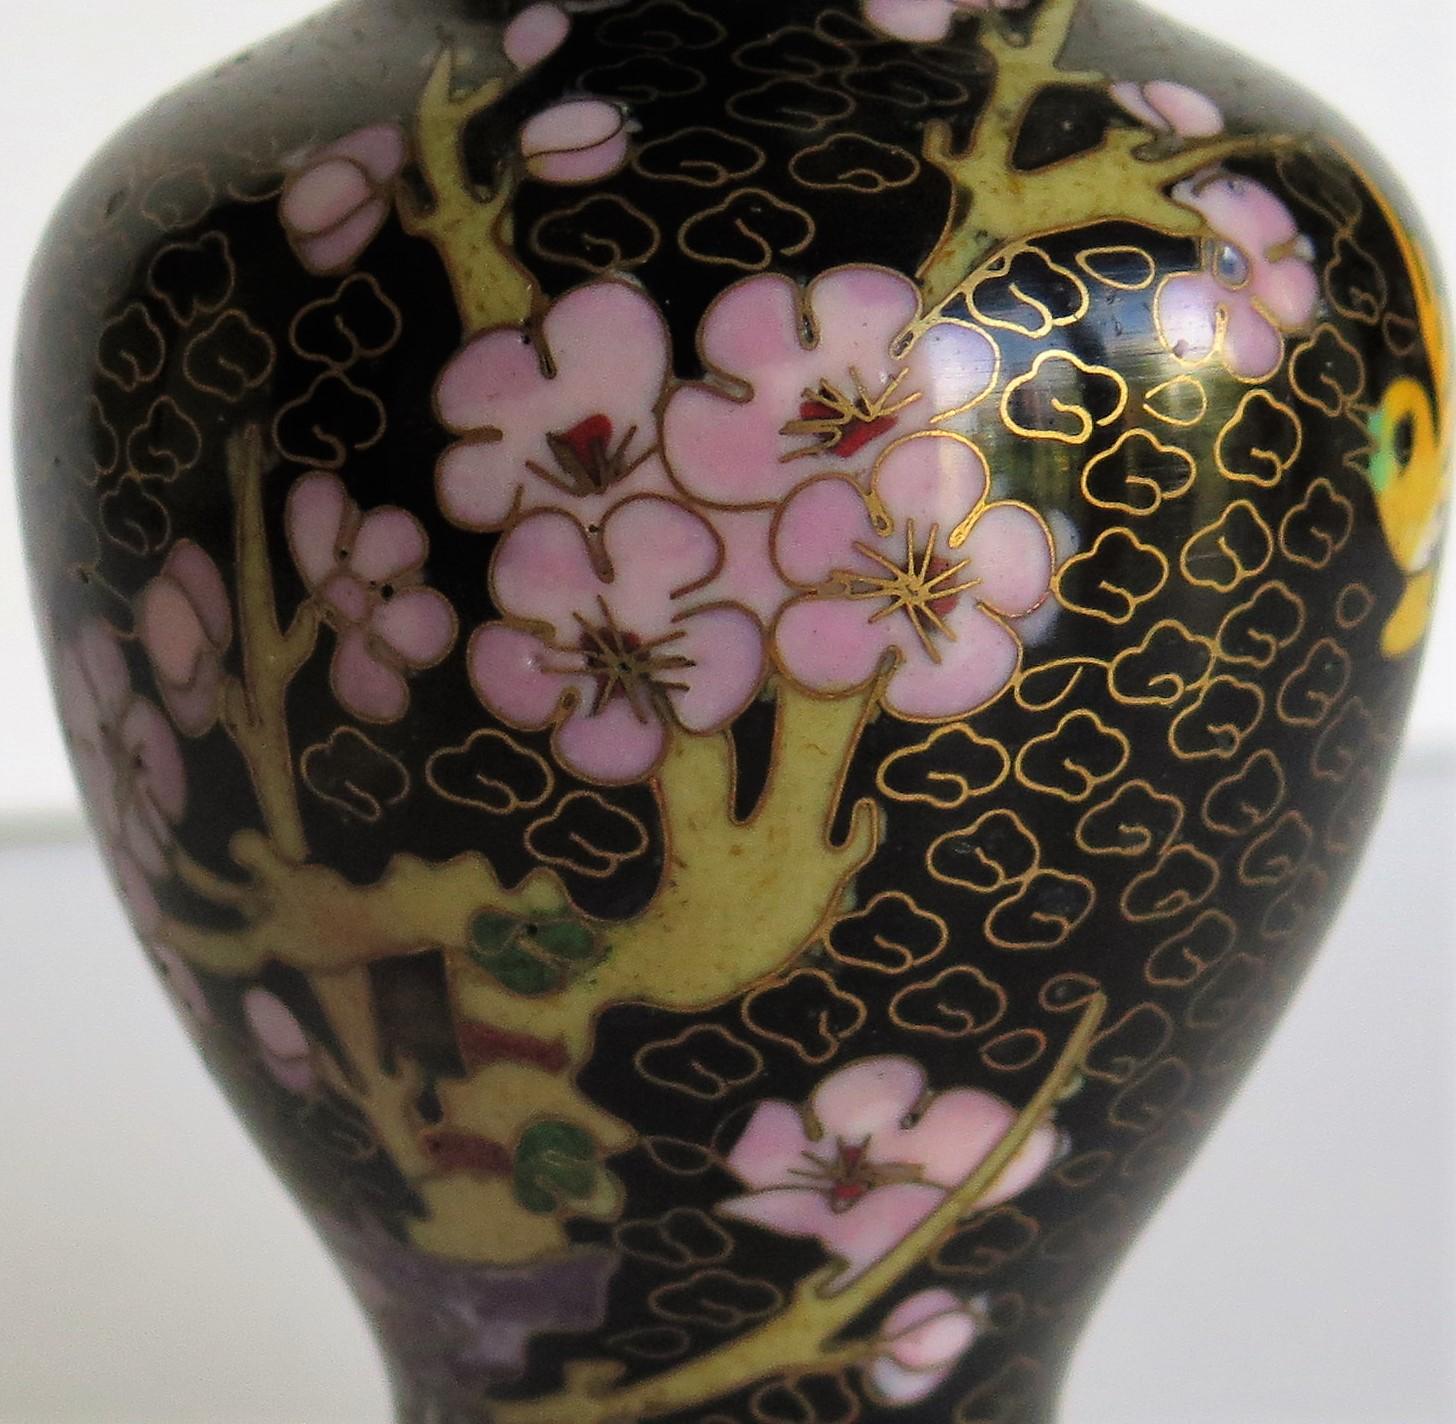 20th Century Chinese Cloisonne Vase with Yellow Bird and Blossoms, circa 1940